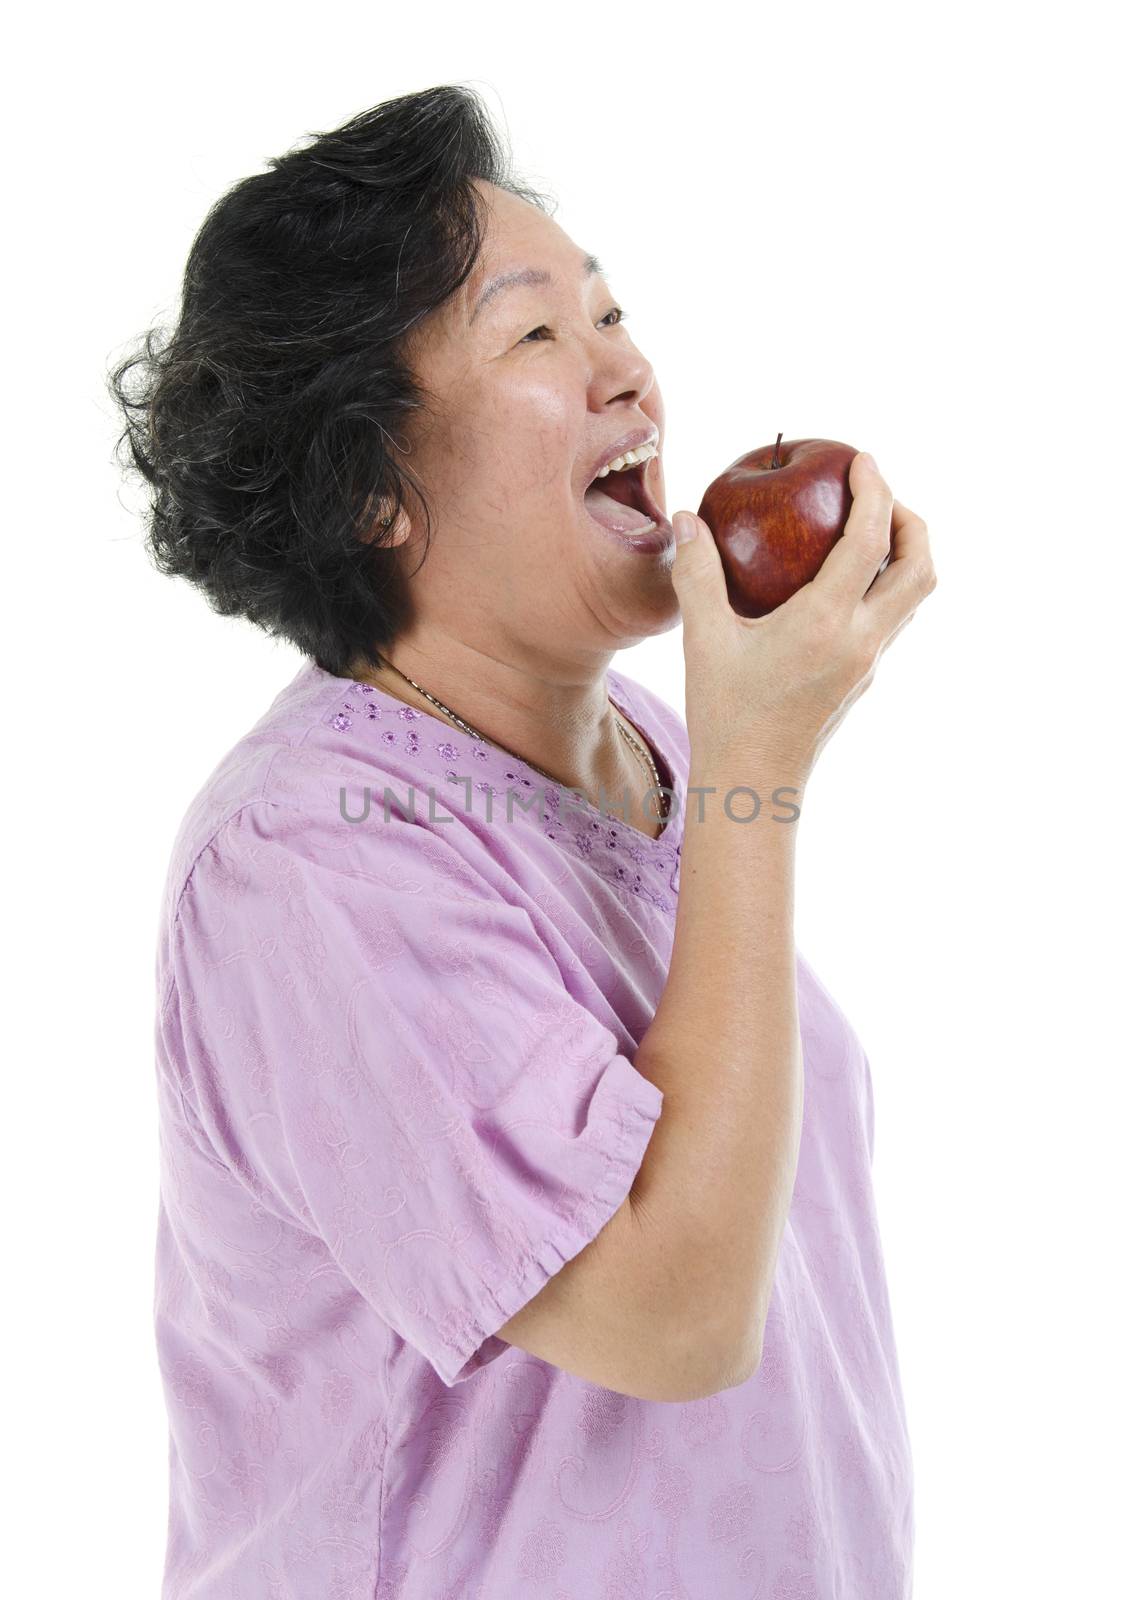 Elderly healthy diet. Portrait of happy 60s Asian senior adult woman smiling and eating an apple, isolated on white background.